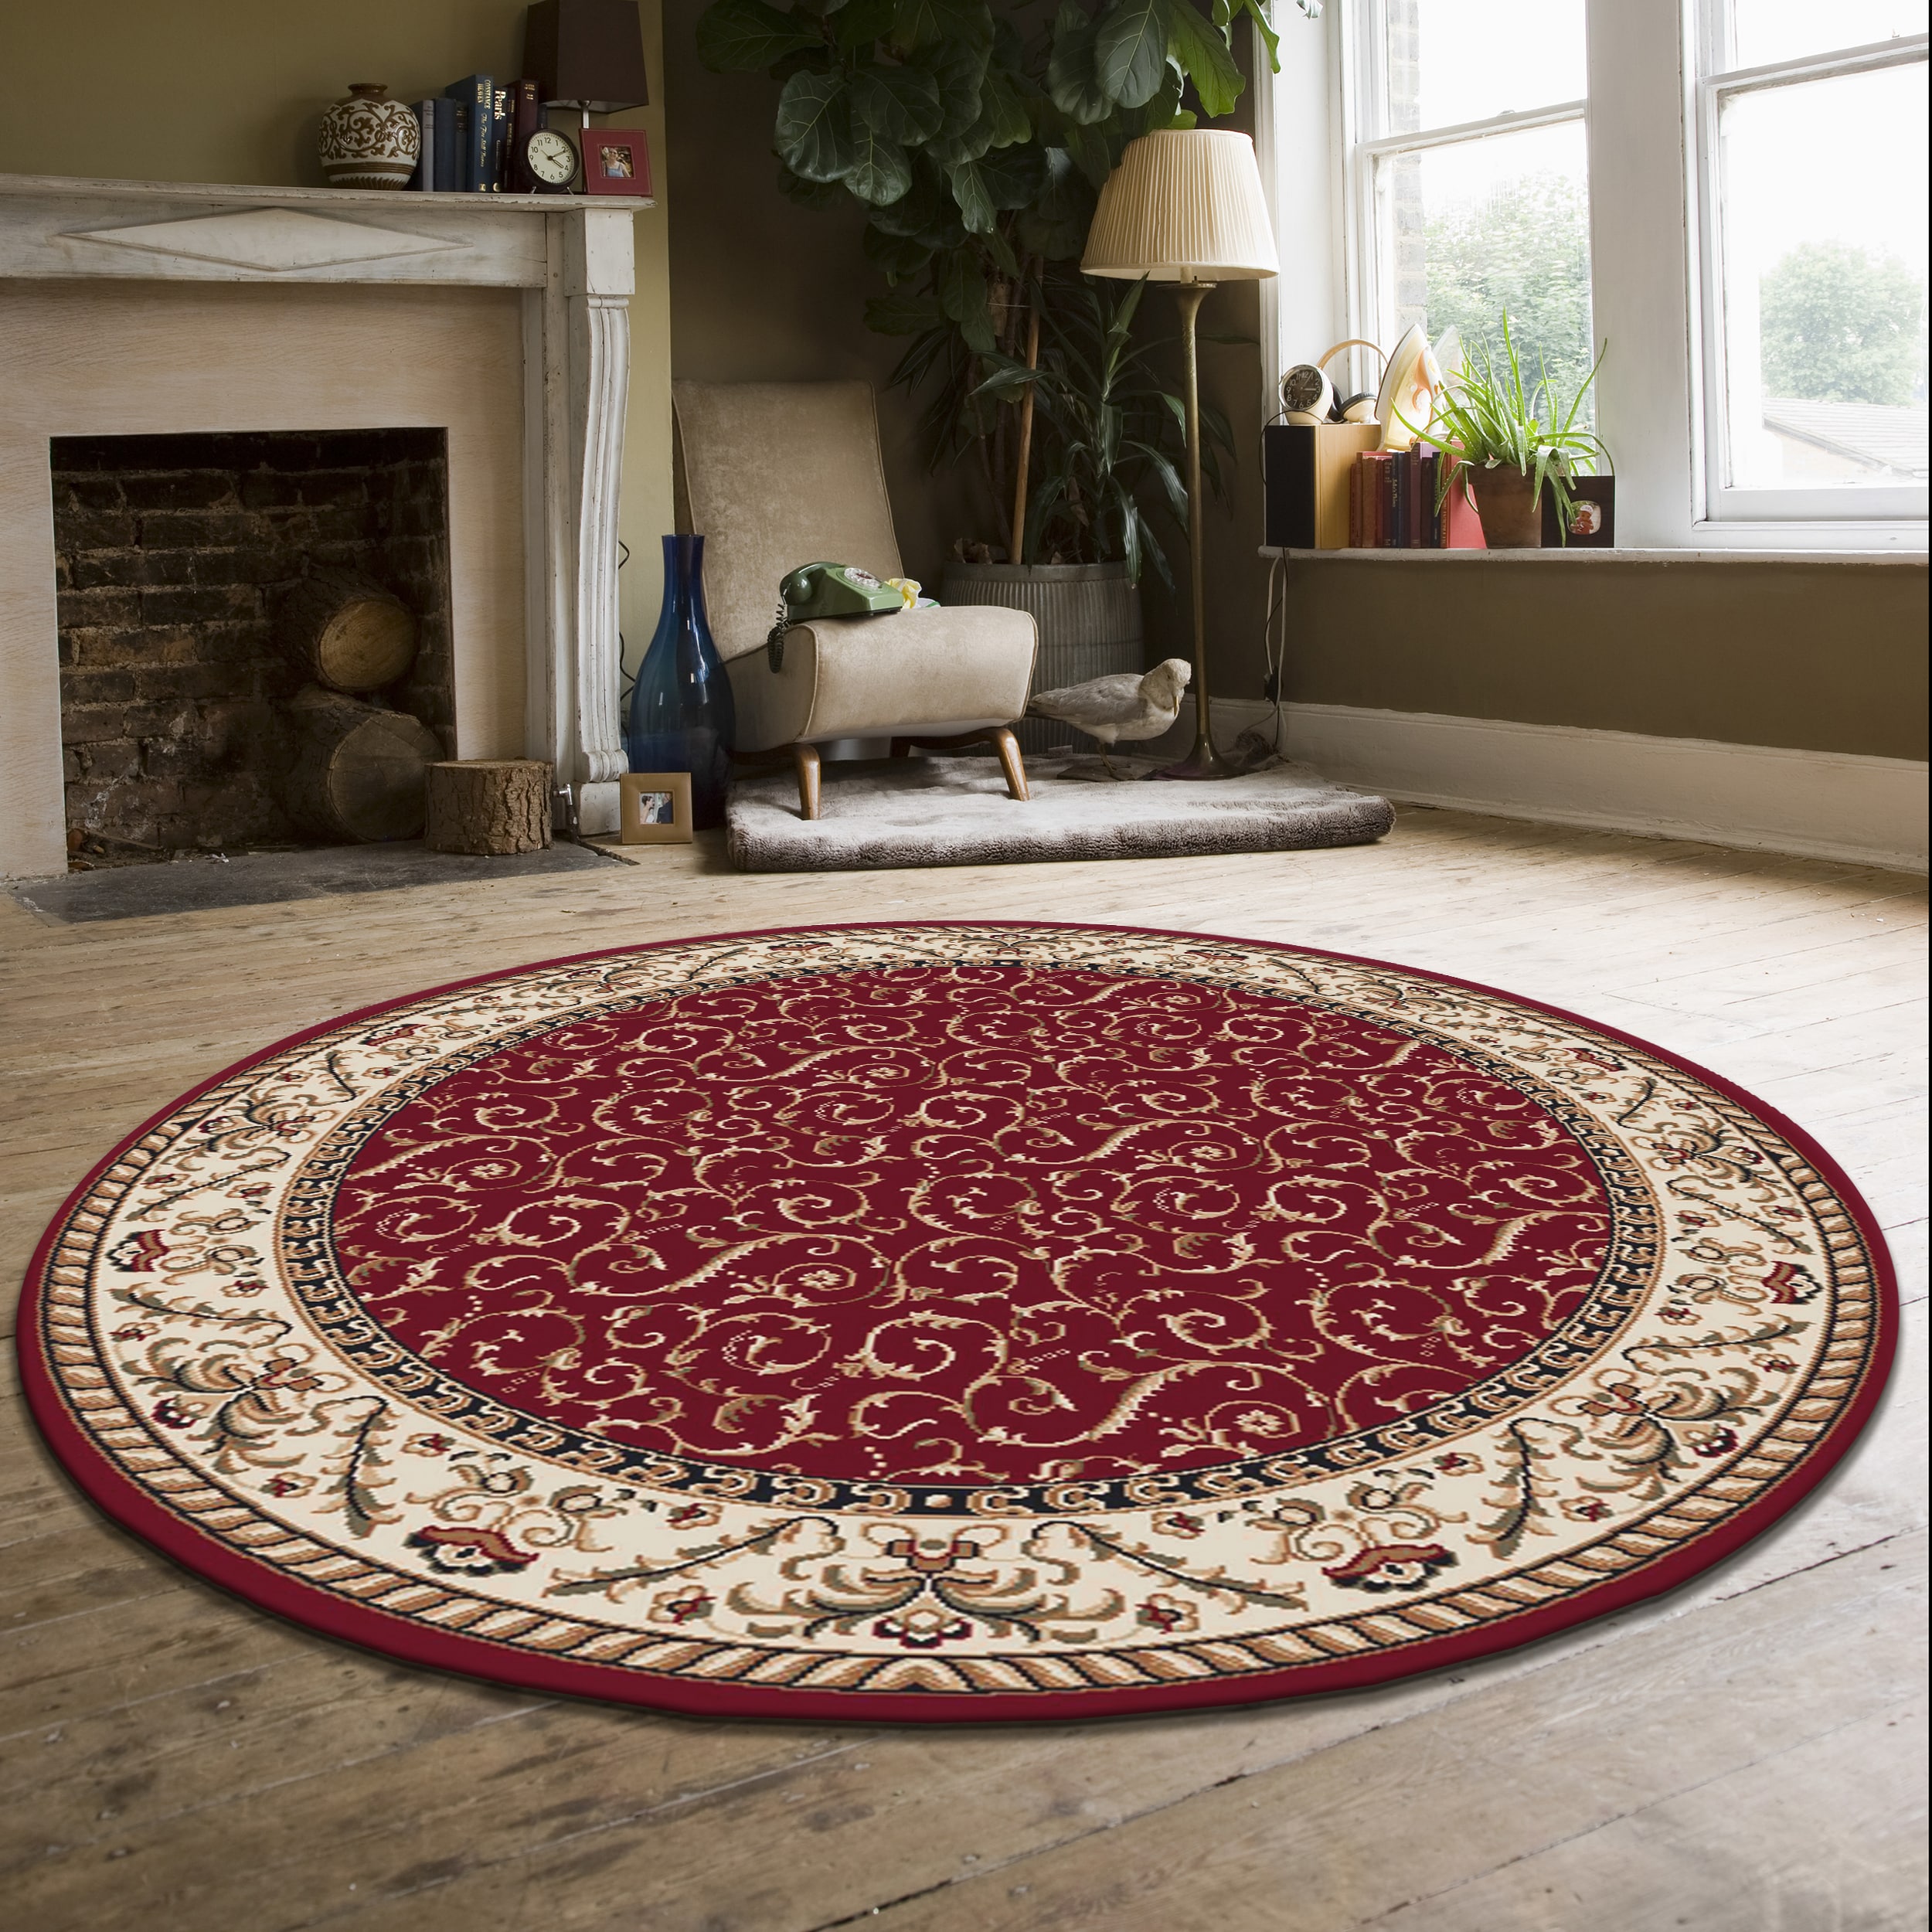 Rugs.com Boston Collection Rug – 8 Ft Round Blue Low-Pile Rug Perfect For  Kitchens, Dining Rooms